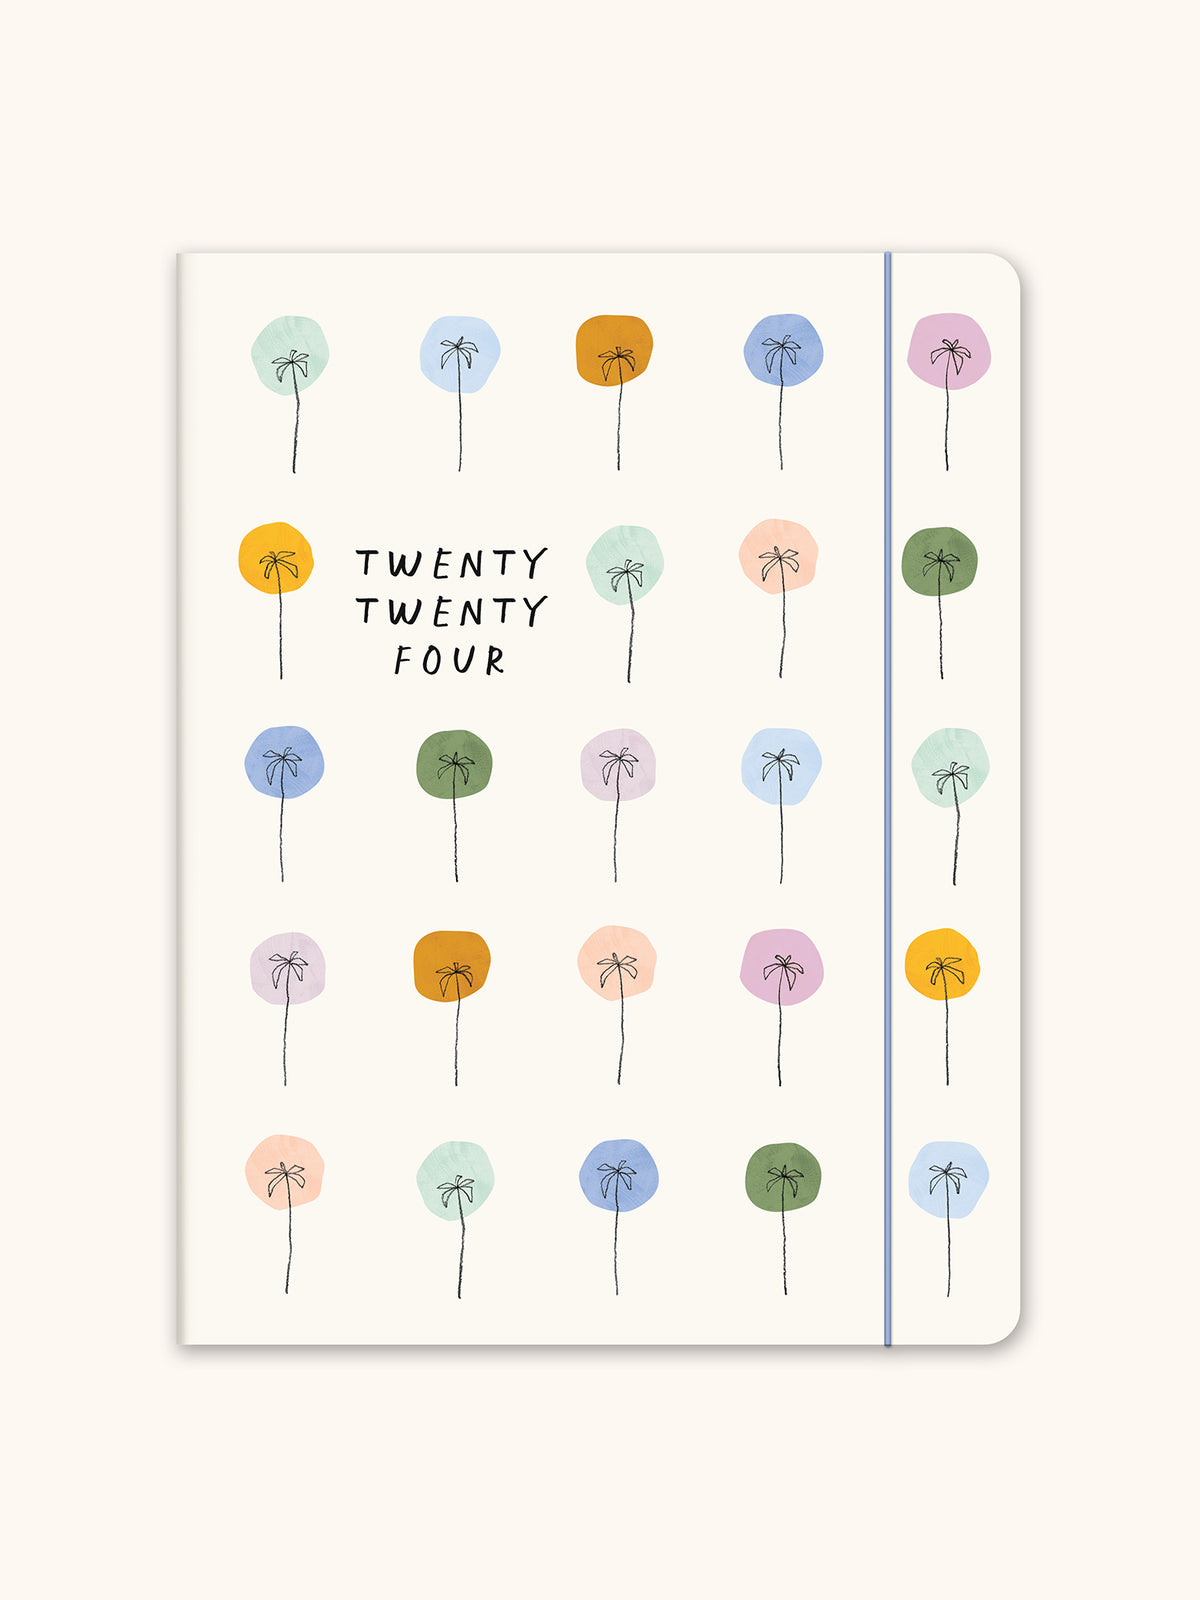 2024 Dotted Palms Just Right Monthly Planner